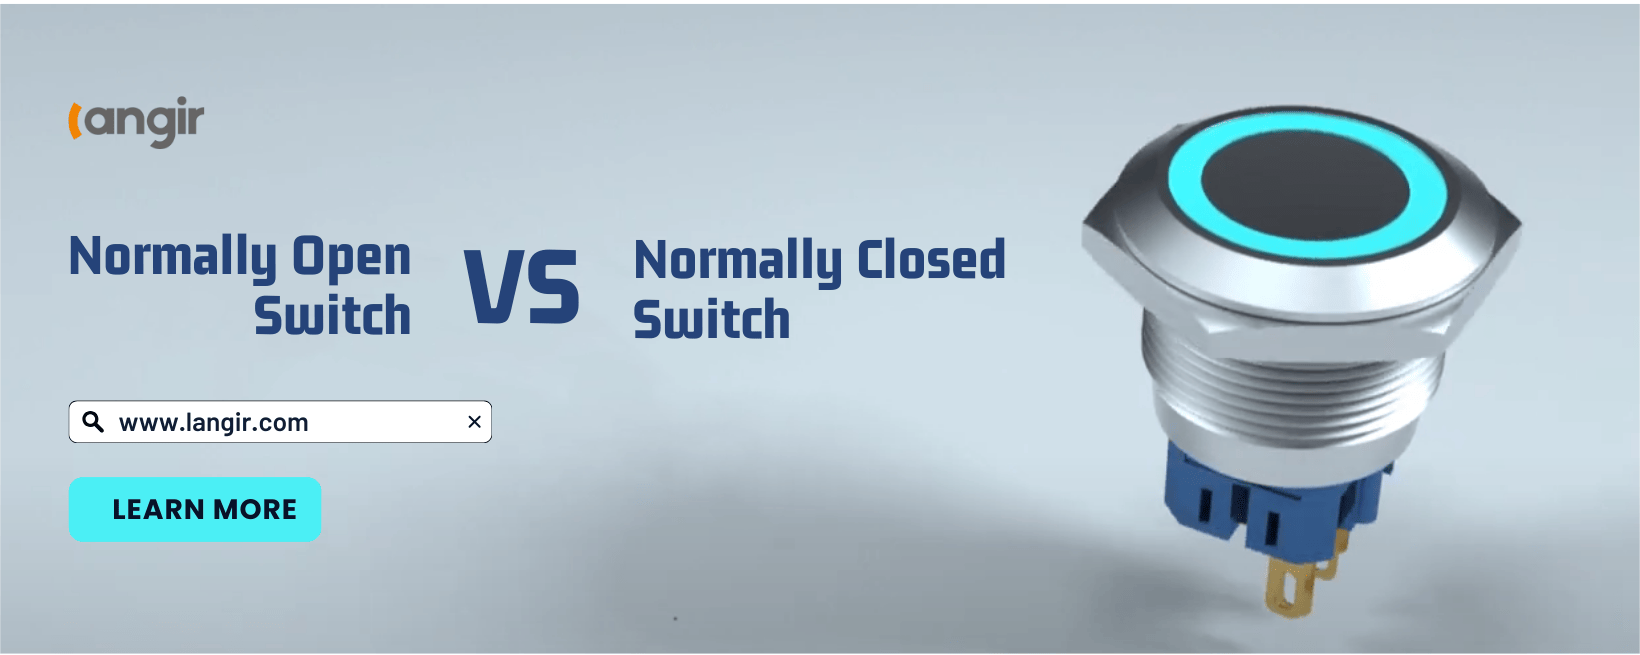 Normally Open vs Normally Closed Switch Langir